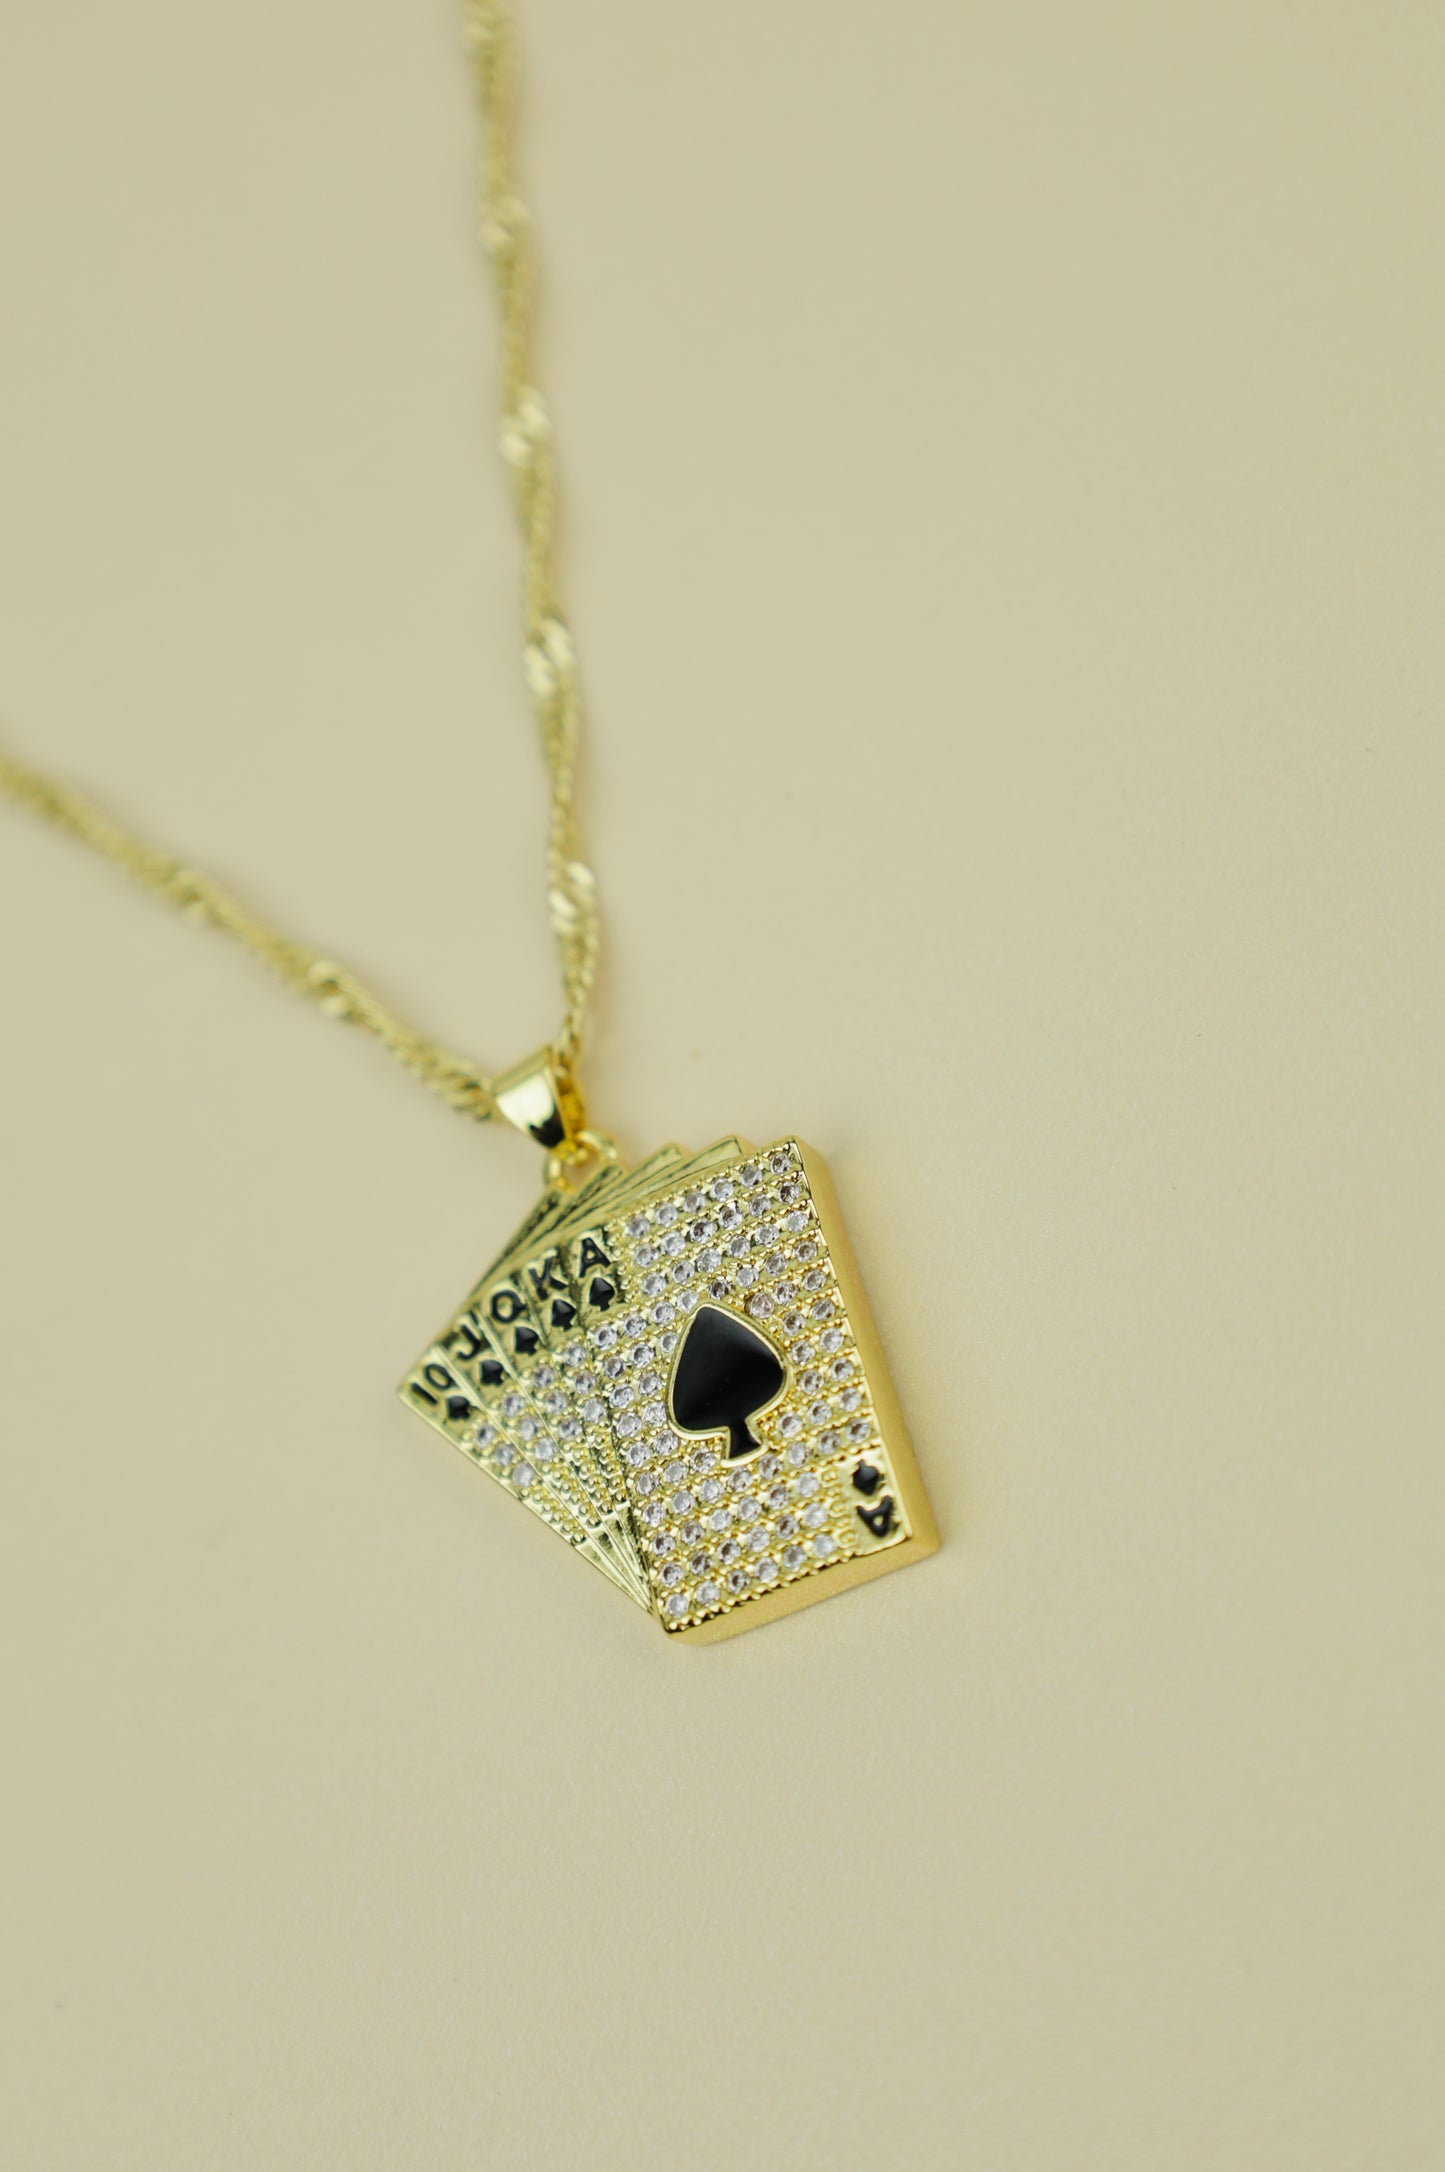 Royal Flush necklace in gold